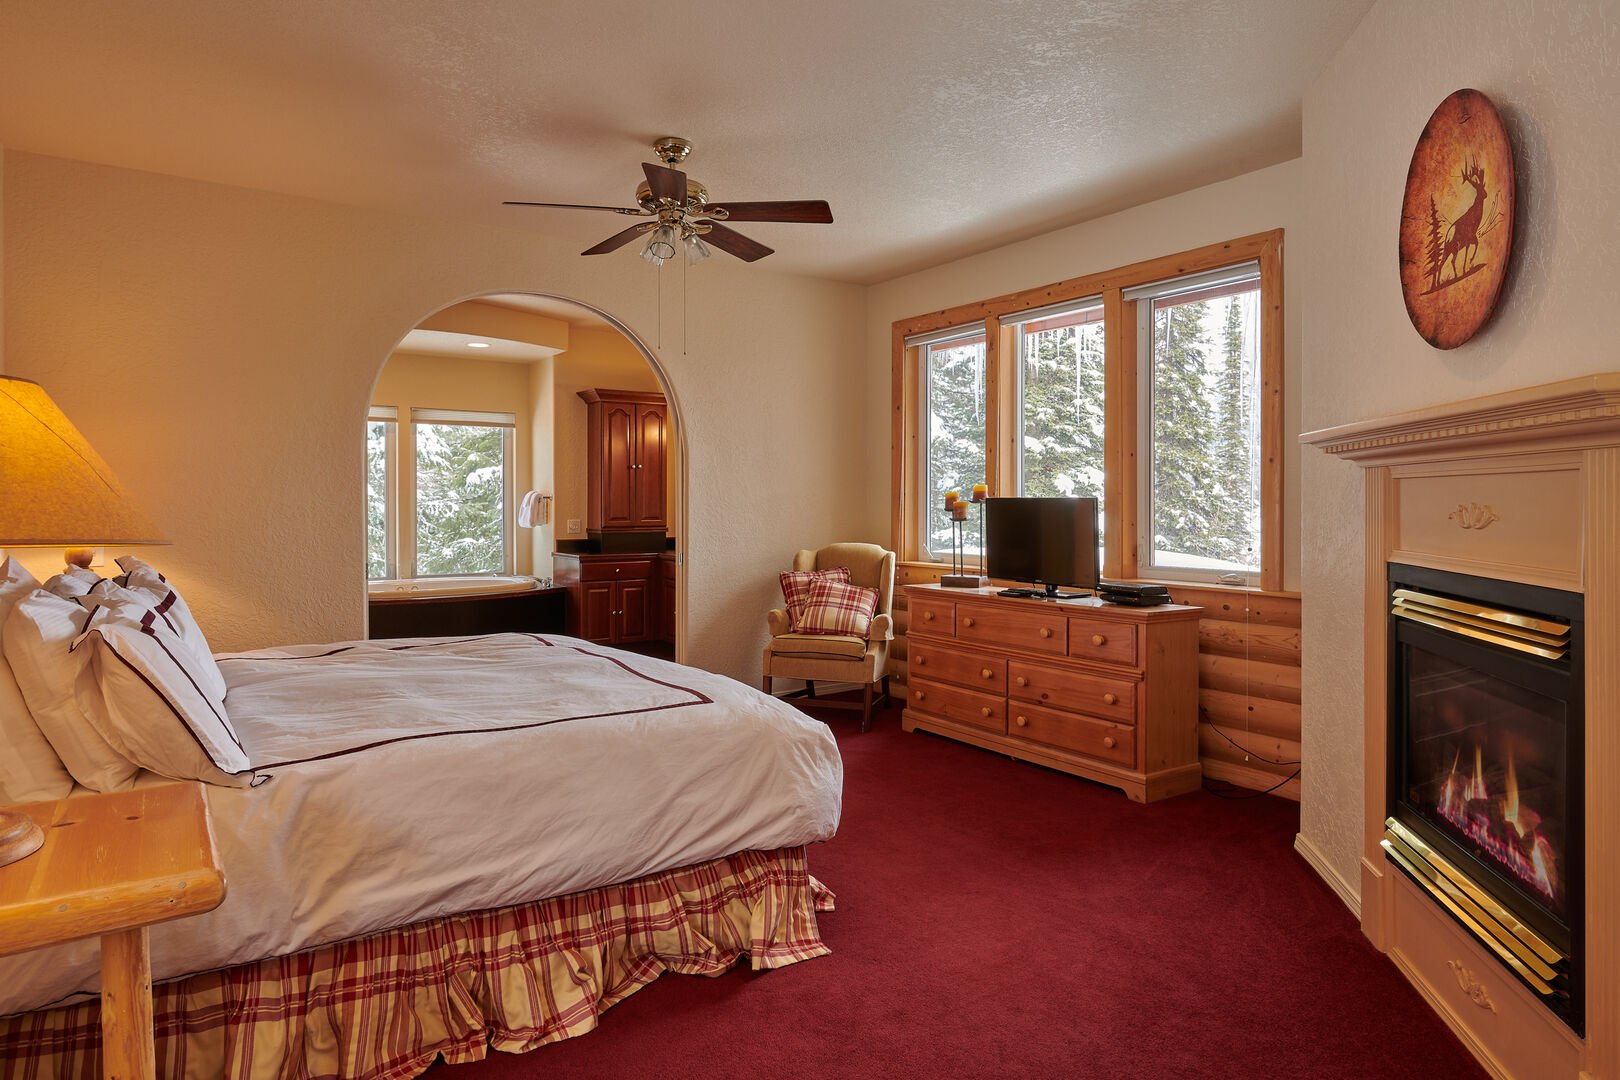 Cozy bedroom in one of our Christmas cabin rentals in Montana.